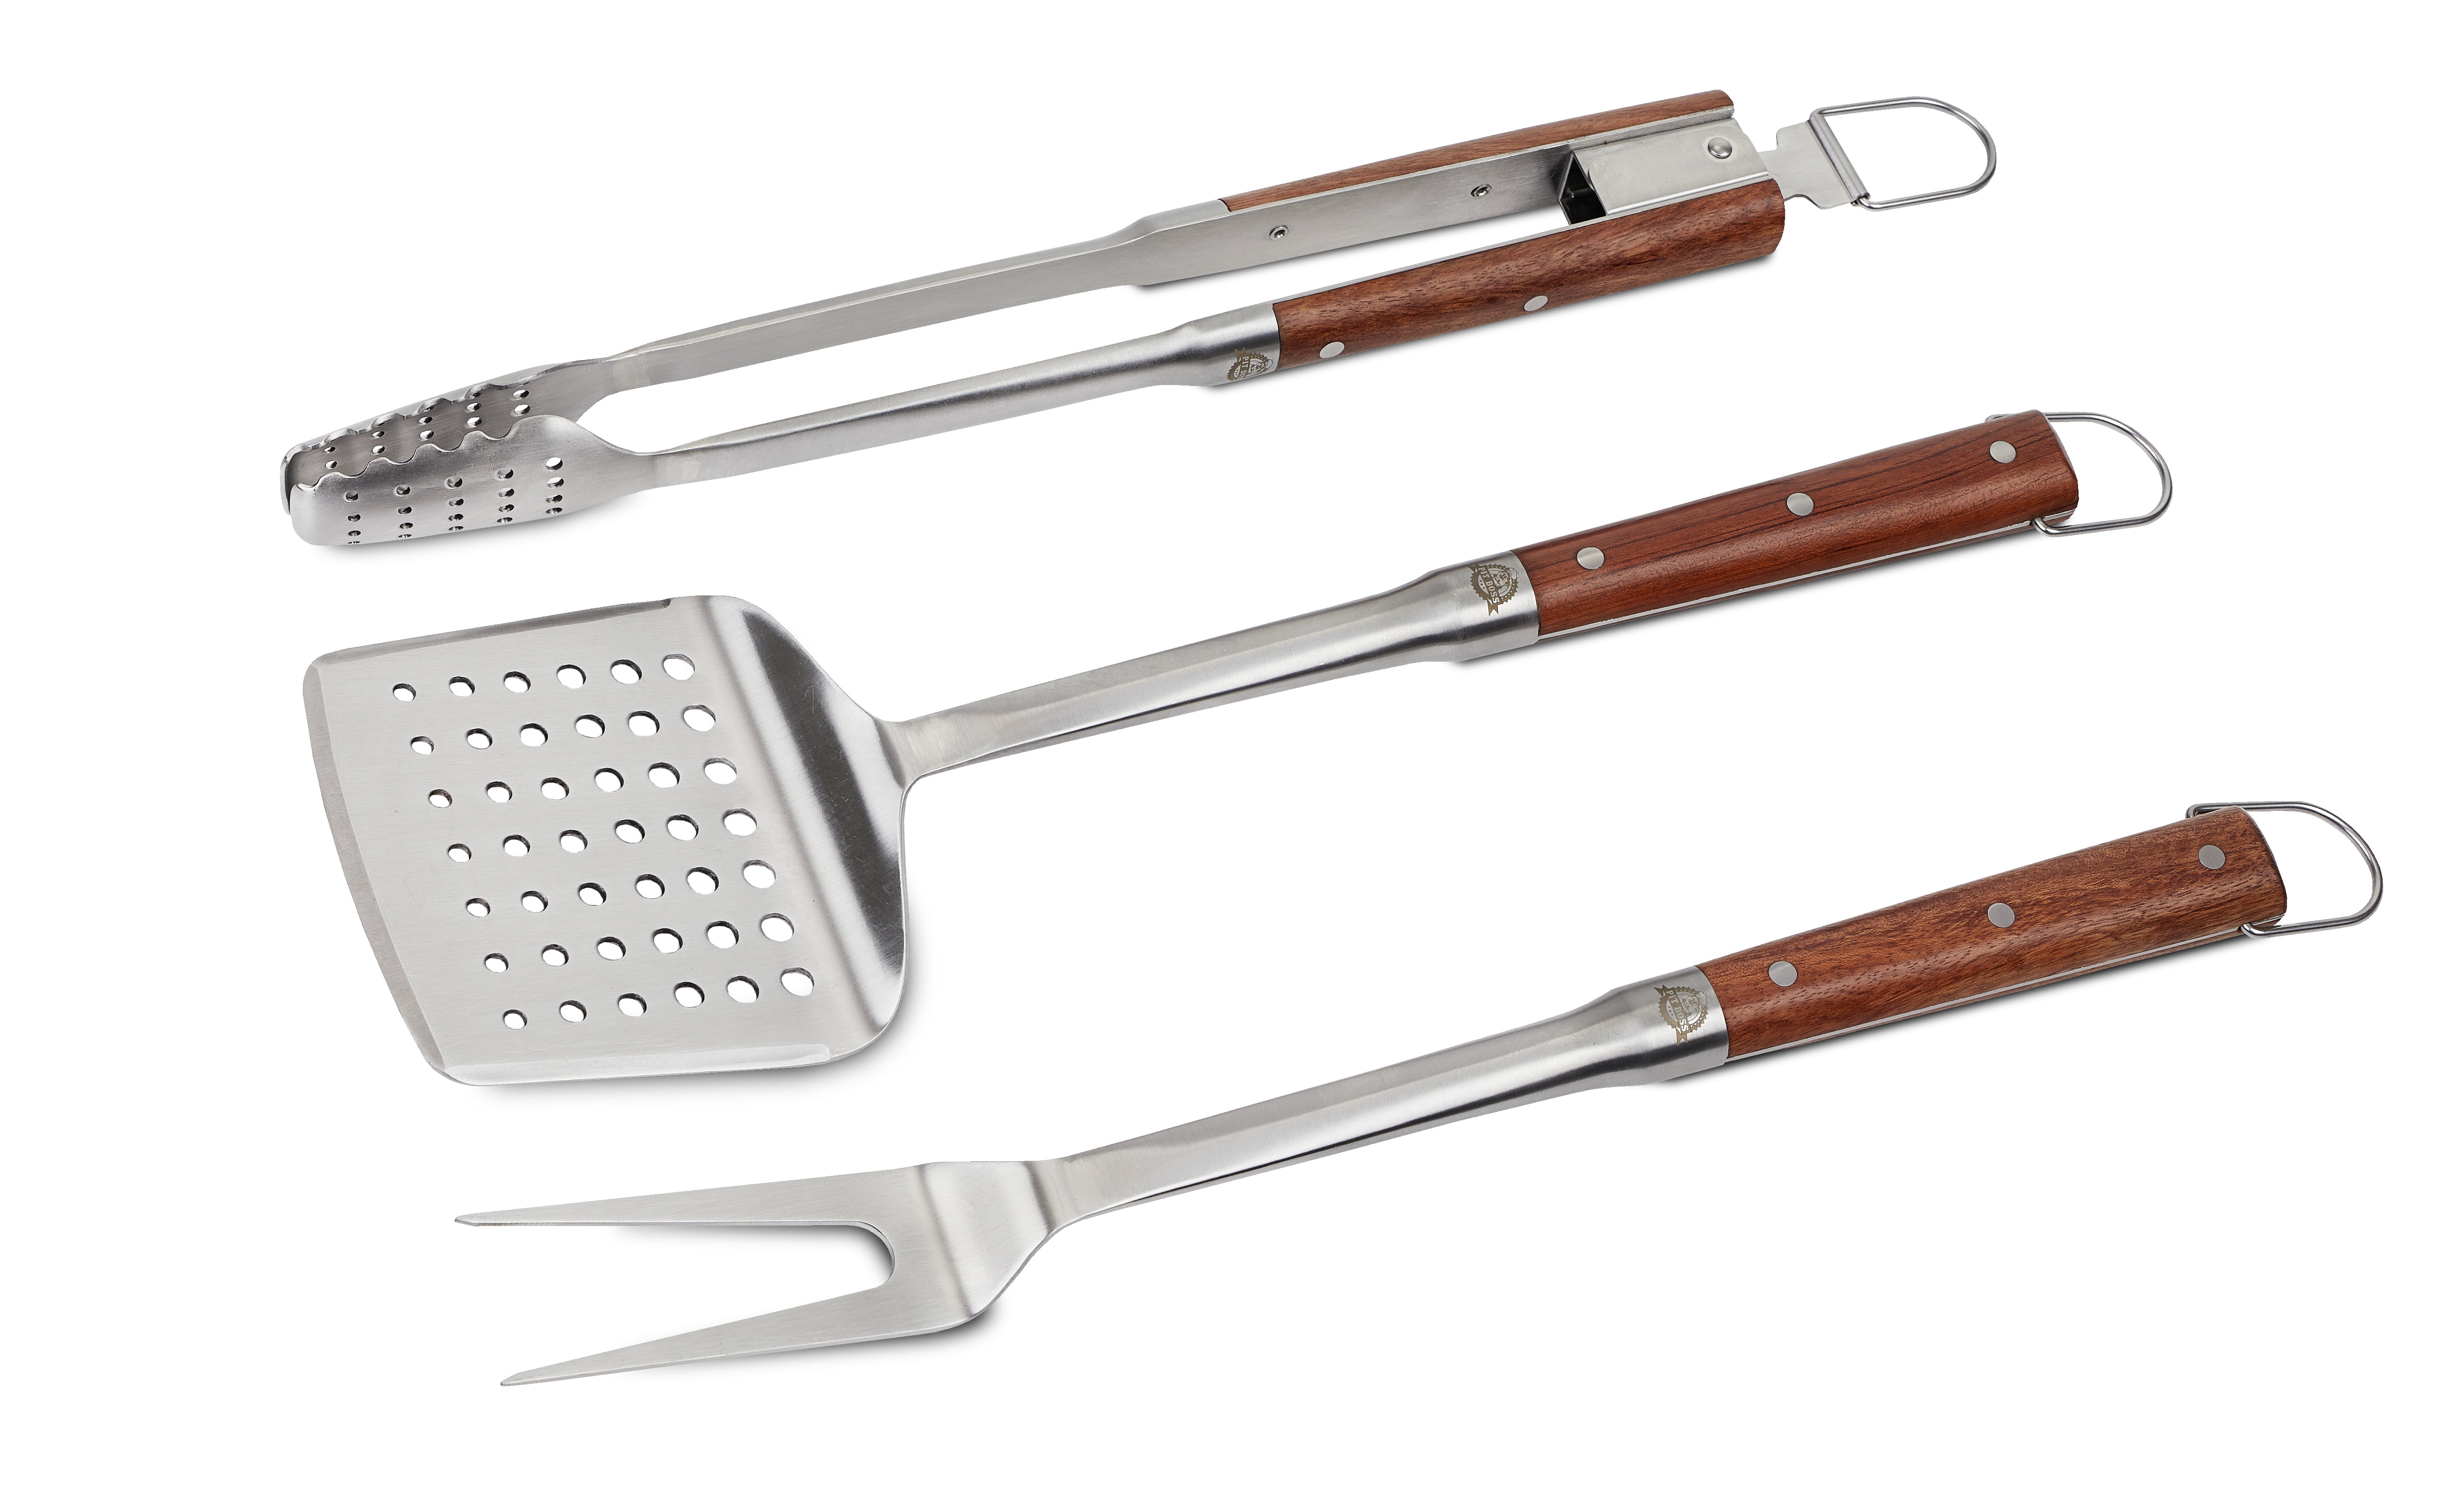 Grill Set with Spatula, Fork, Tongs in Custom Personalized Box